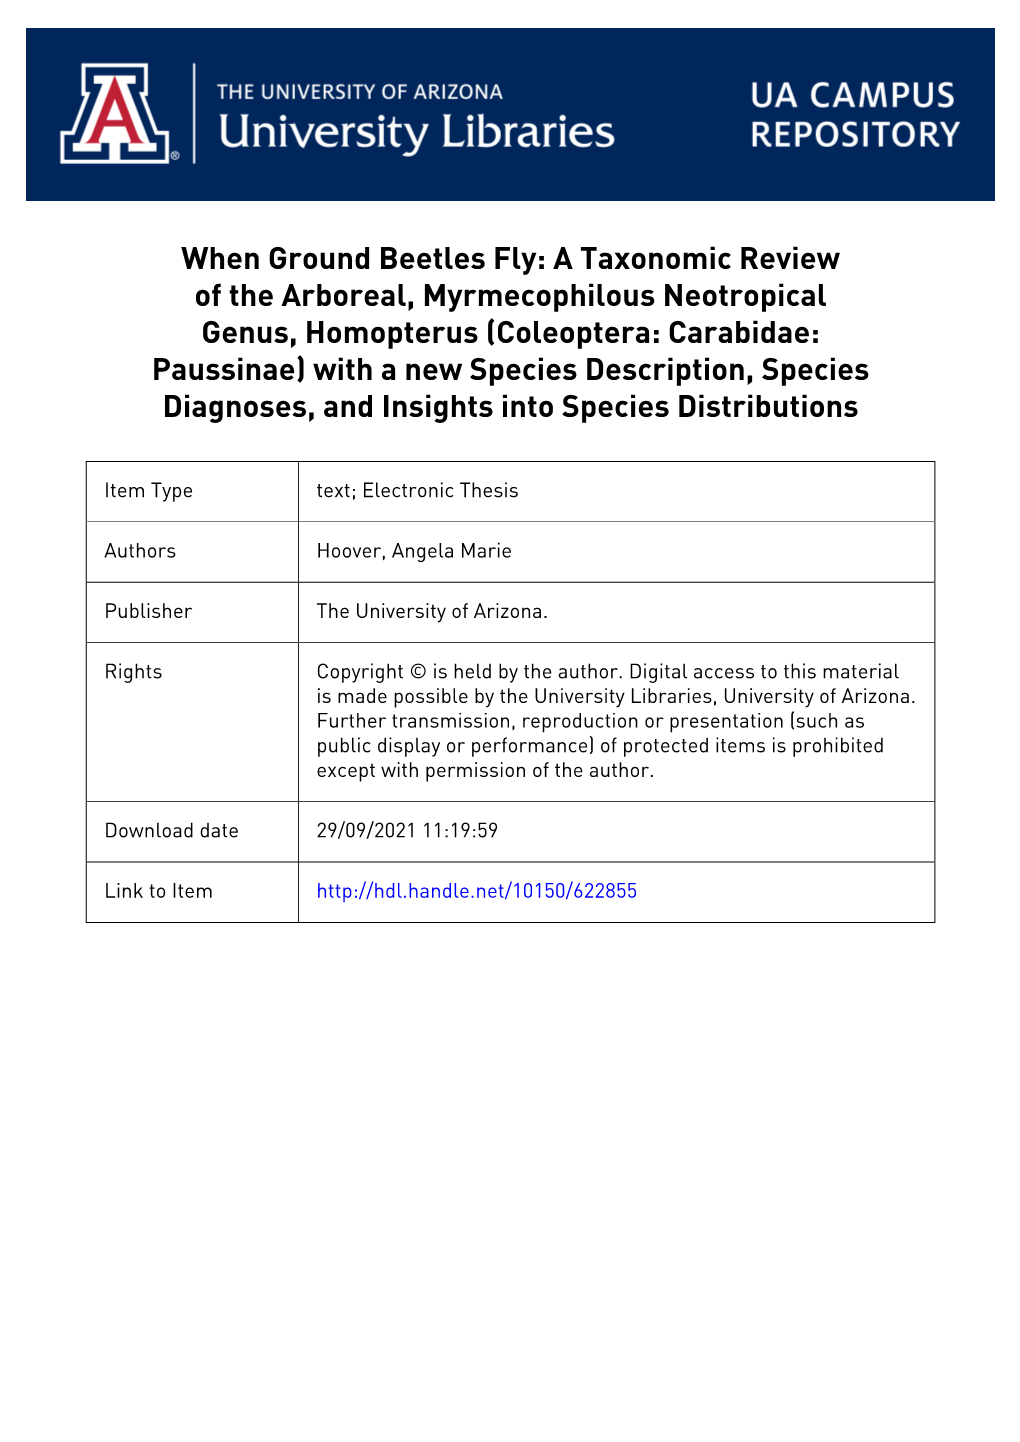 When Ground Beetles Fly: a Taxonomic